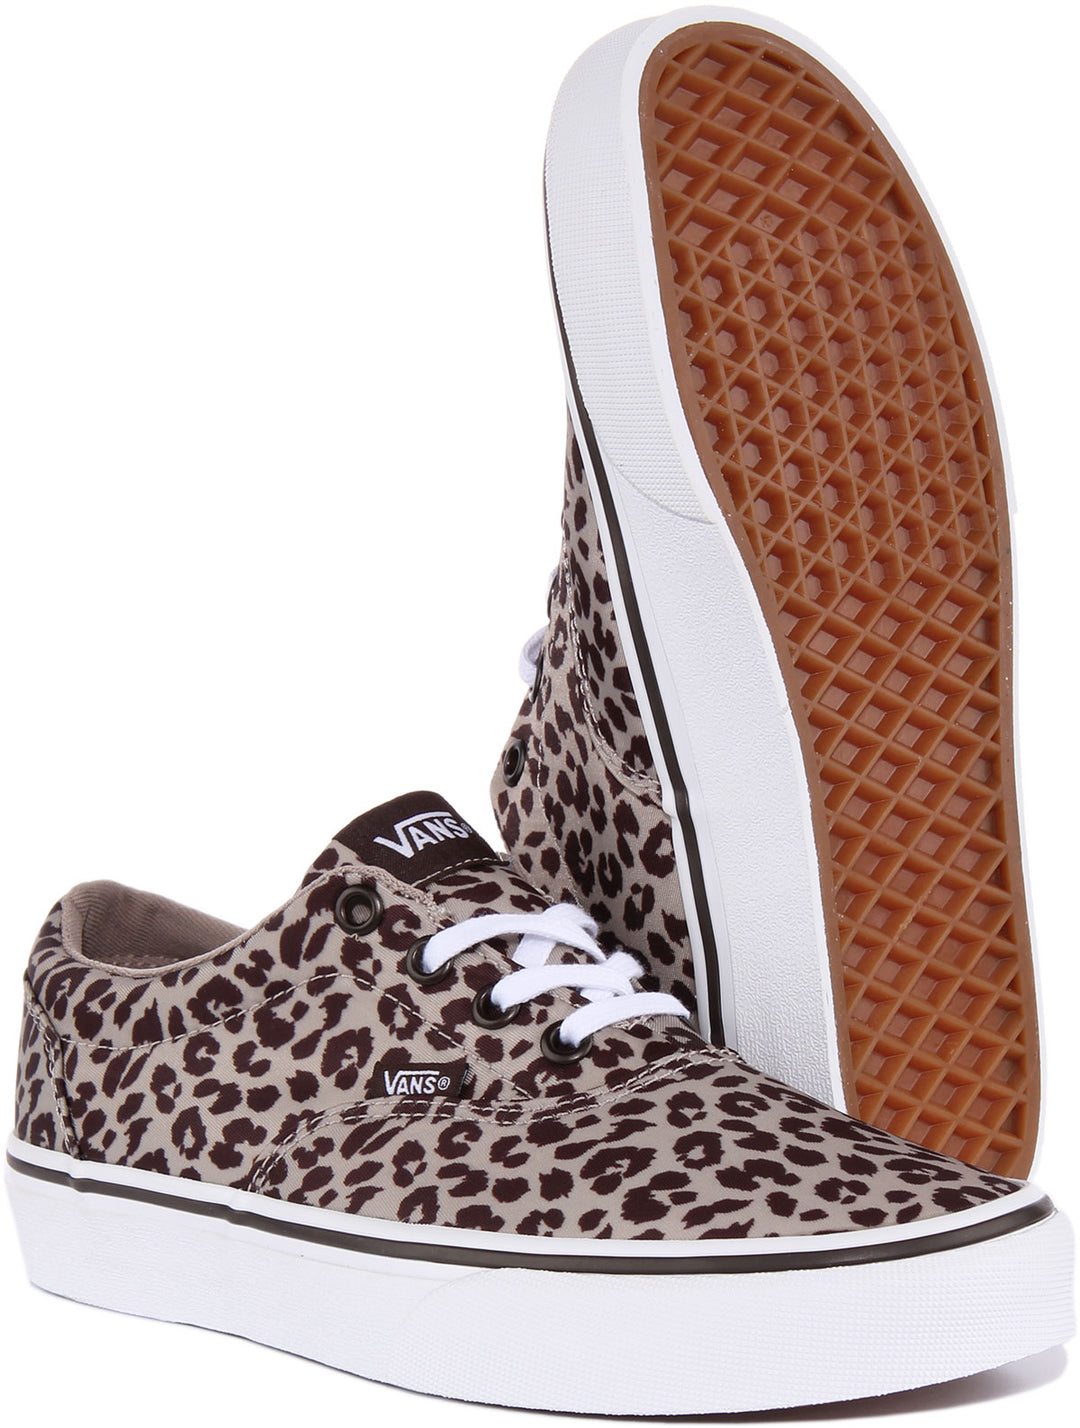 suficiente Mitones Malawi Vans Doheny In Leopard For Women | Vans Authentic Lace Up Trainers –  4feetshoes